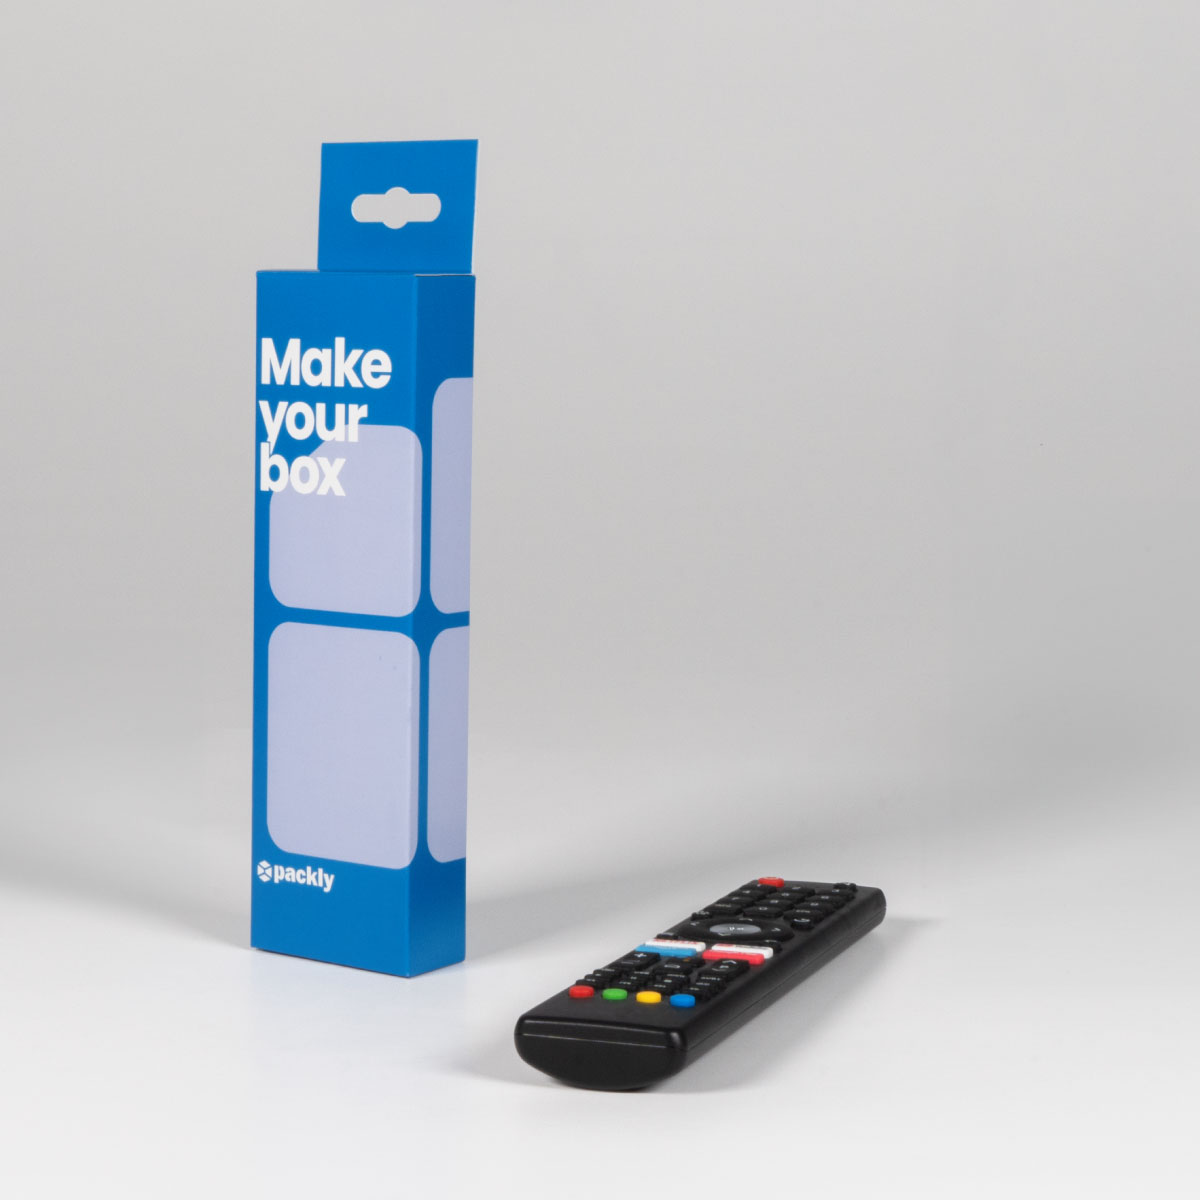 Remote control packaging